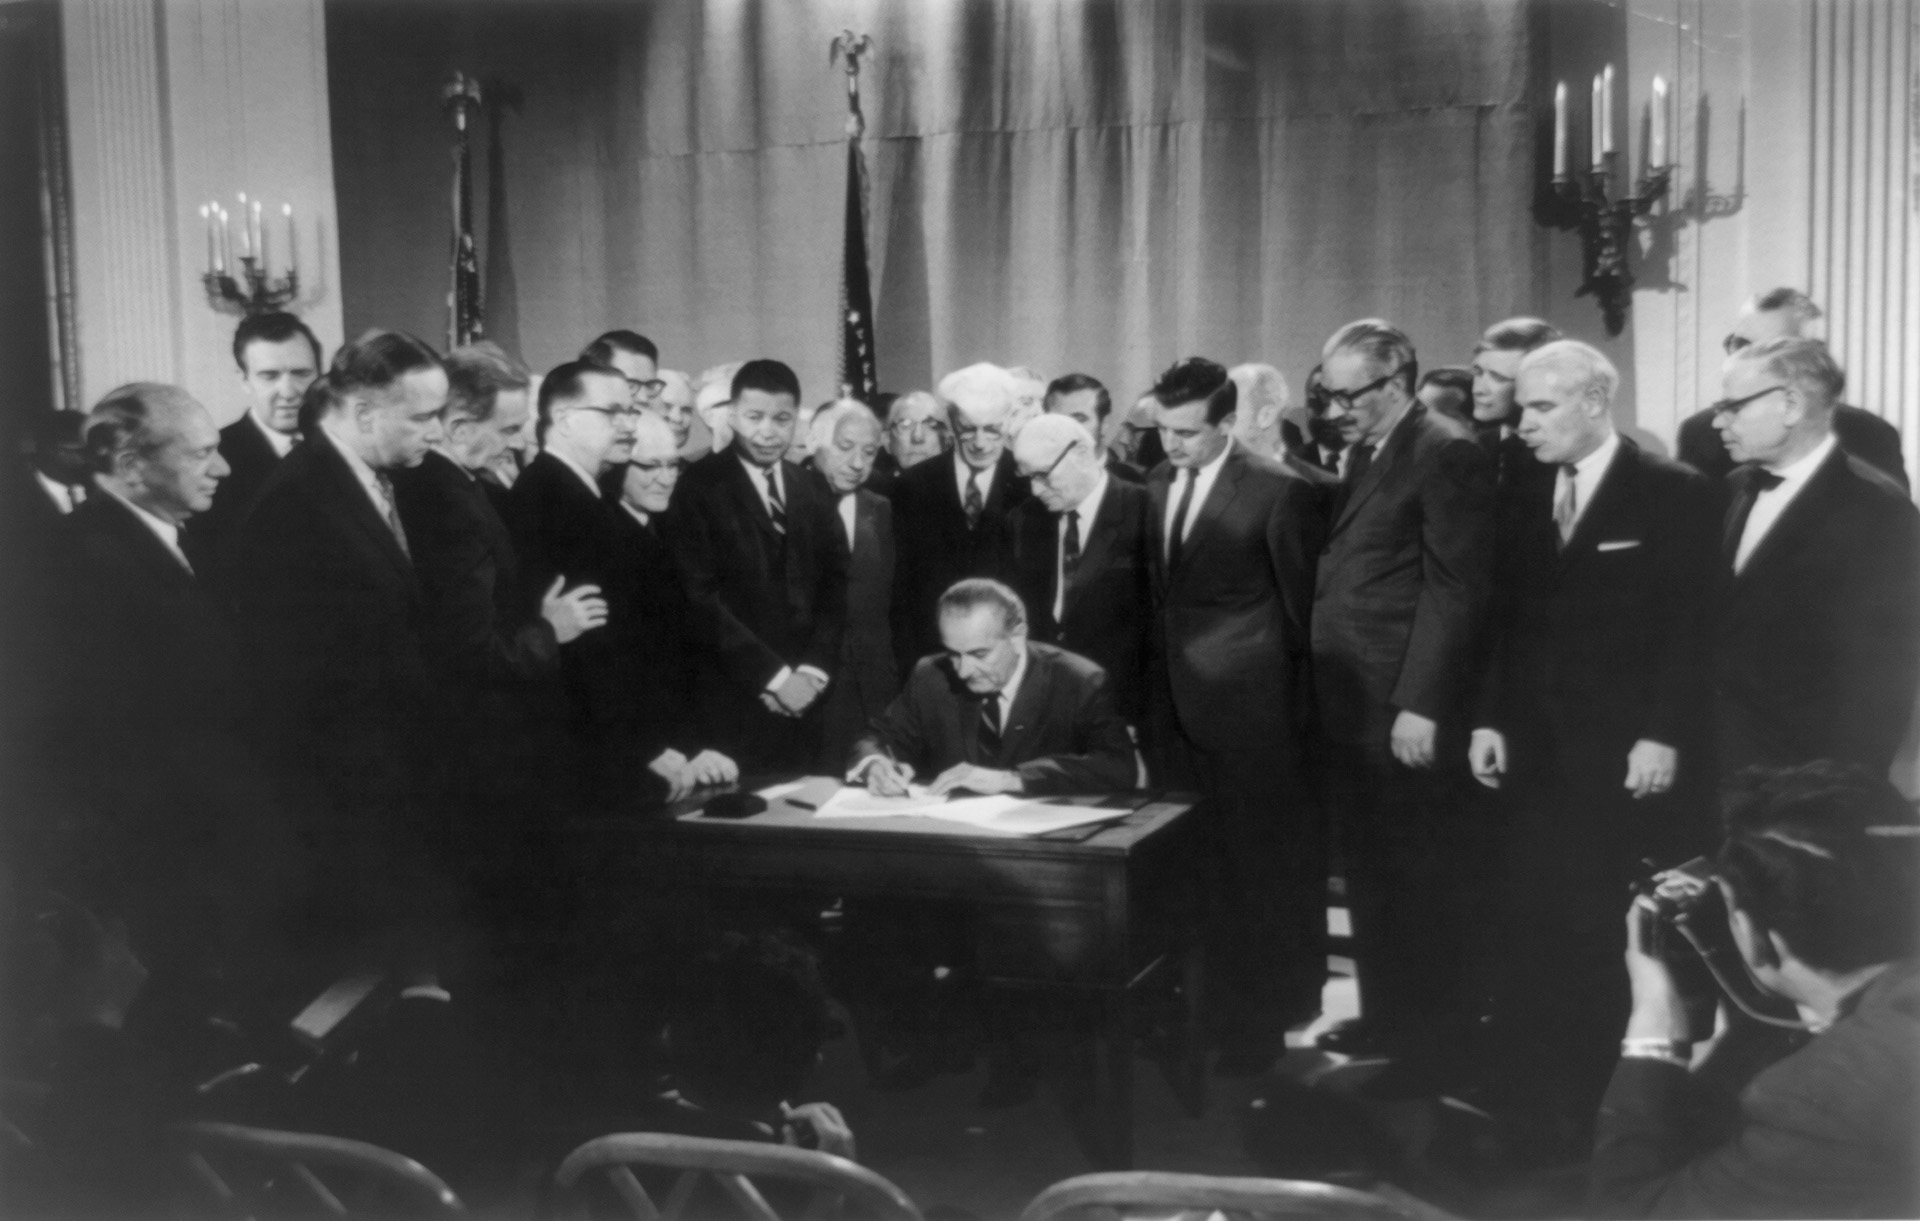 President Lyndon B. Johnson signing the 1968 Civil Rights Act that included fair housing on April 11, 1968.